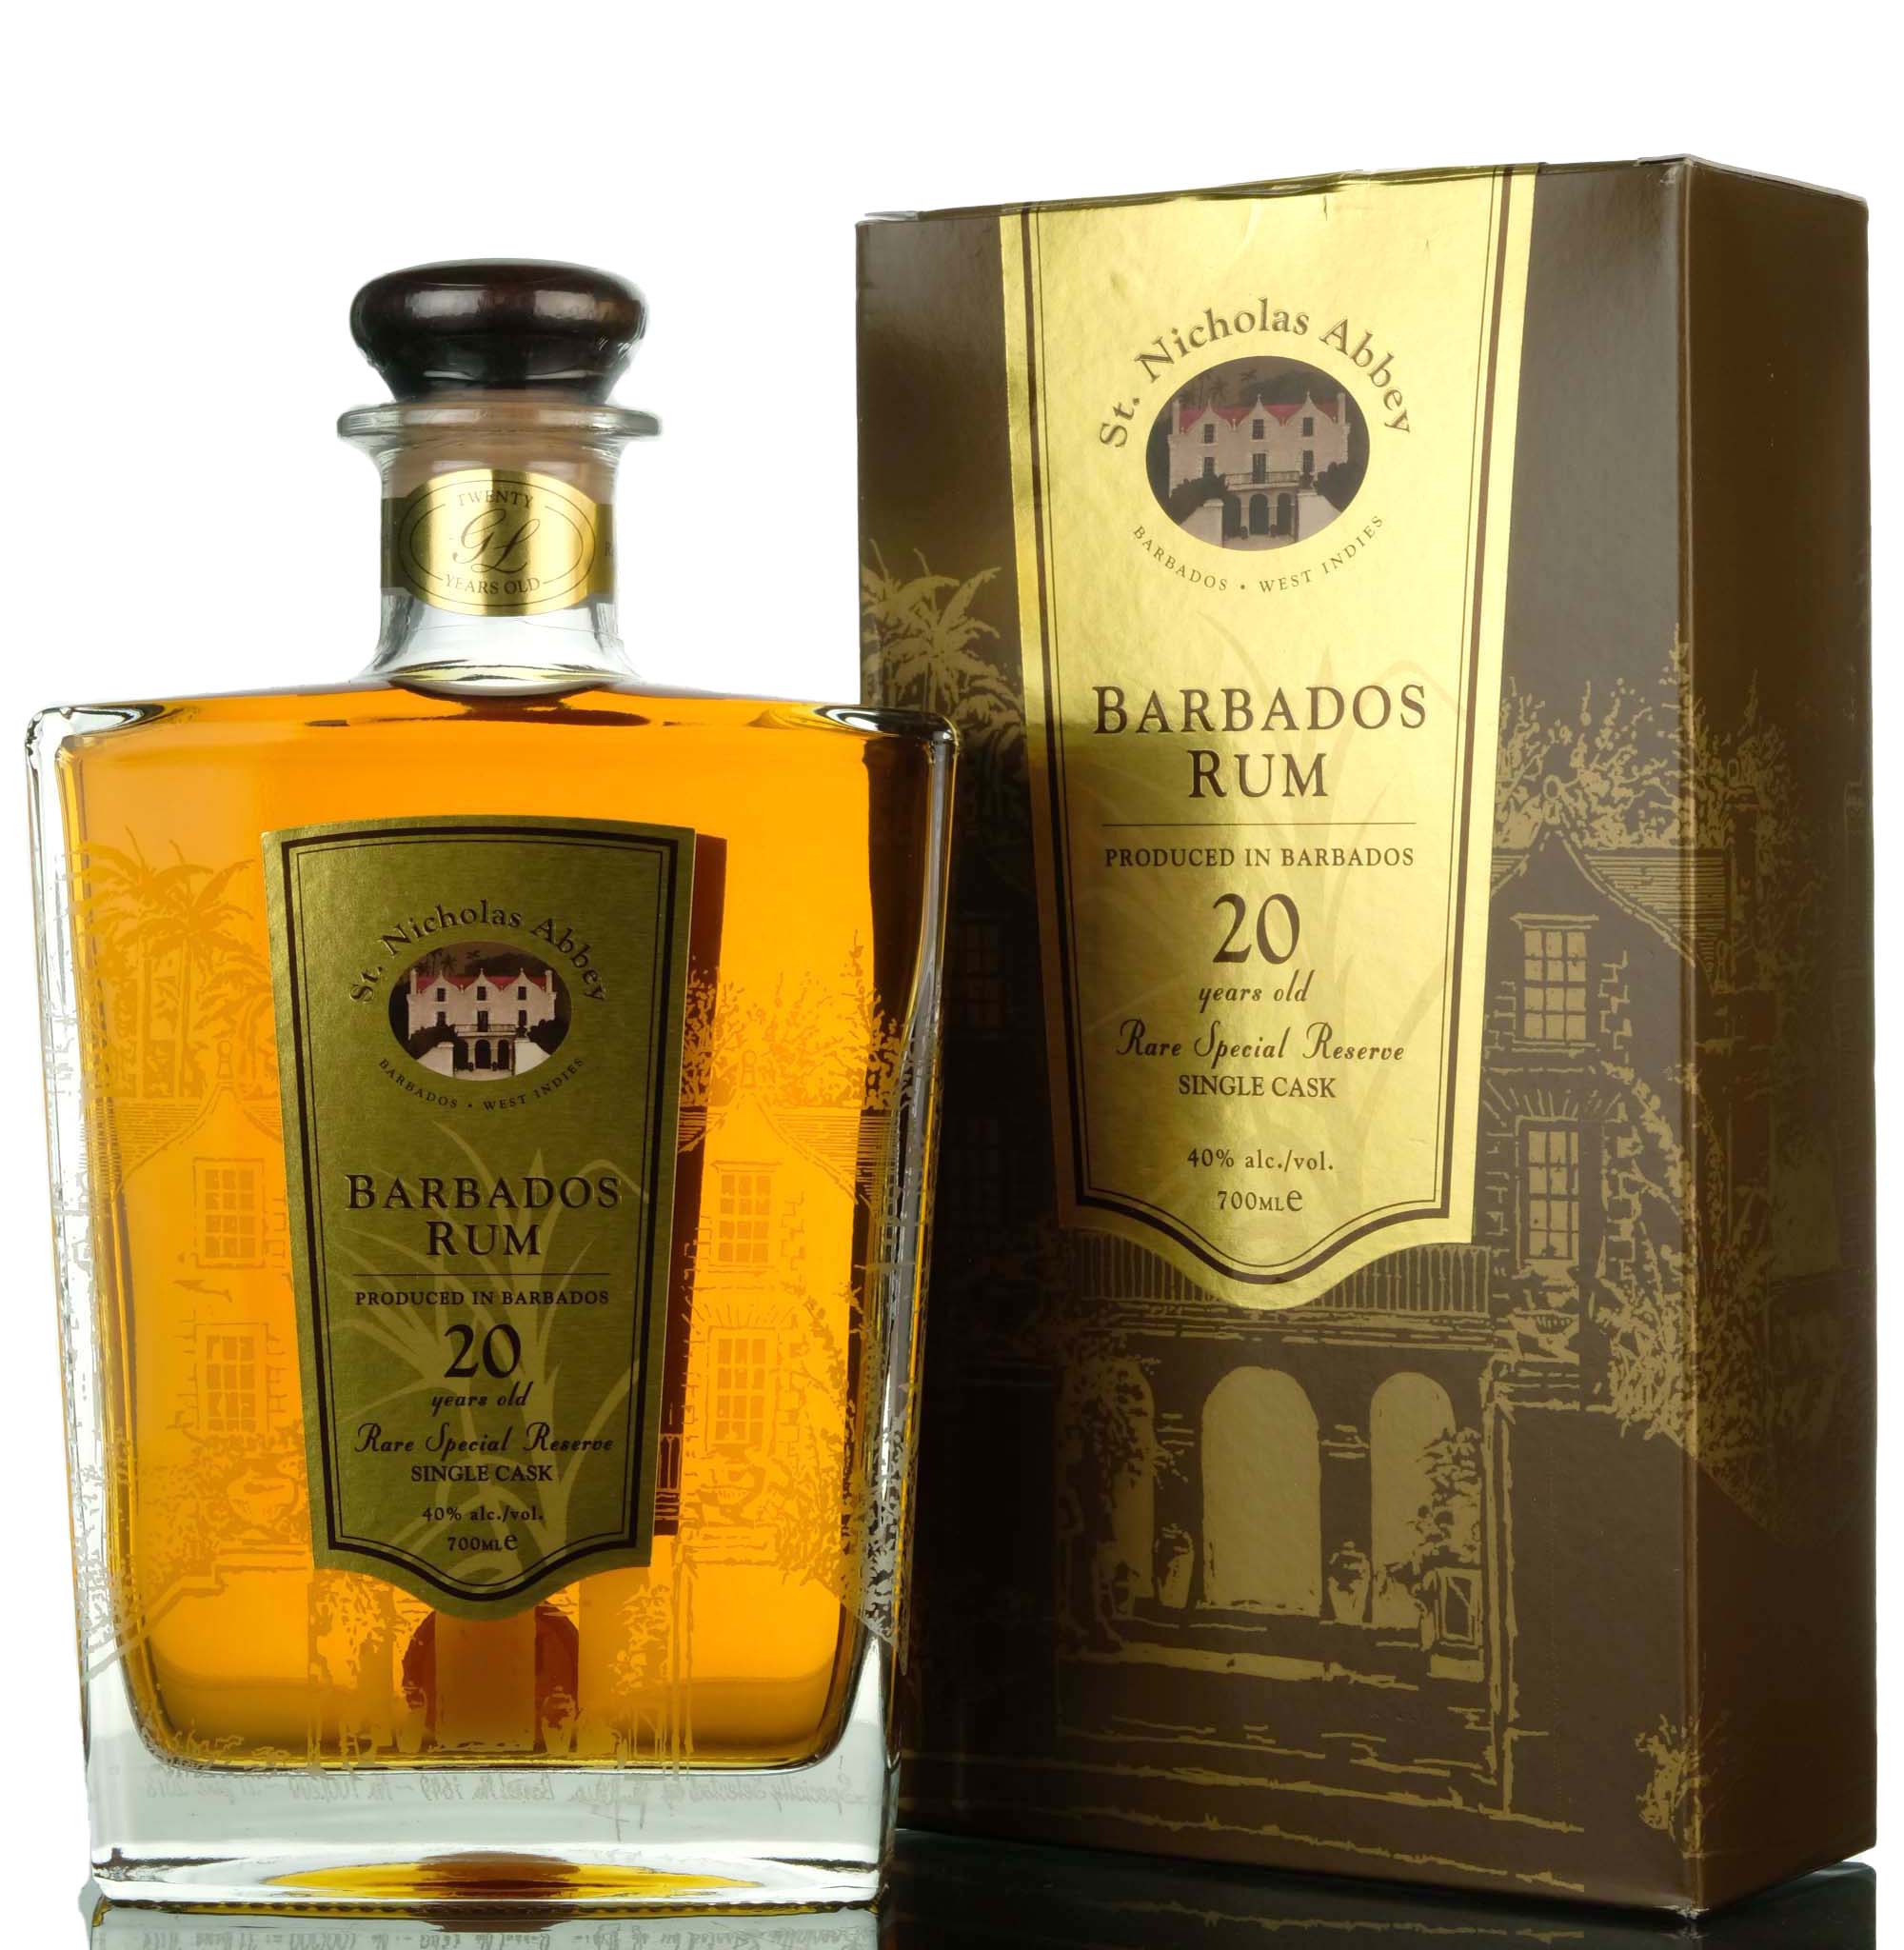 St. Nicholas Abbey 20 Year Old - Barbados Single Cask Rum 1659 - 2018 Release